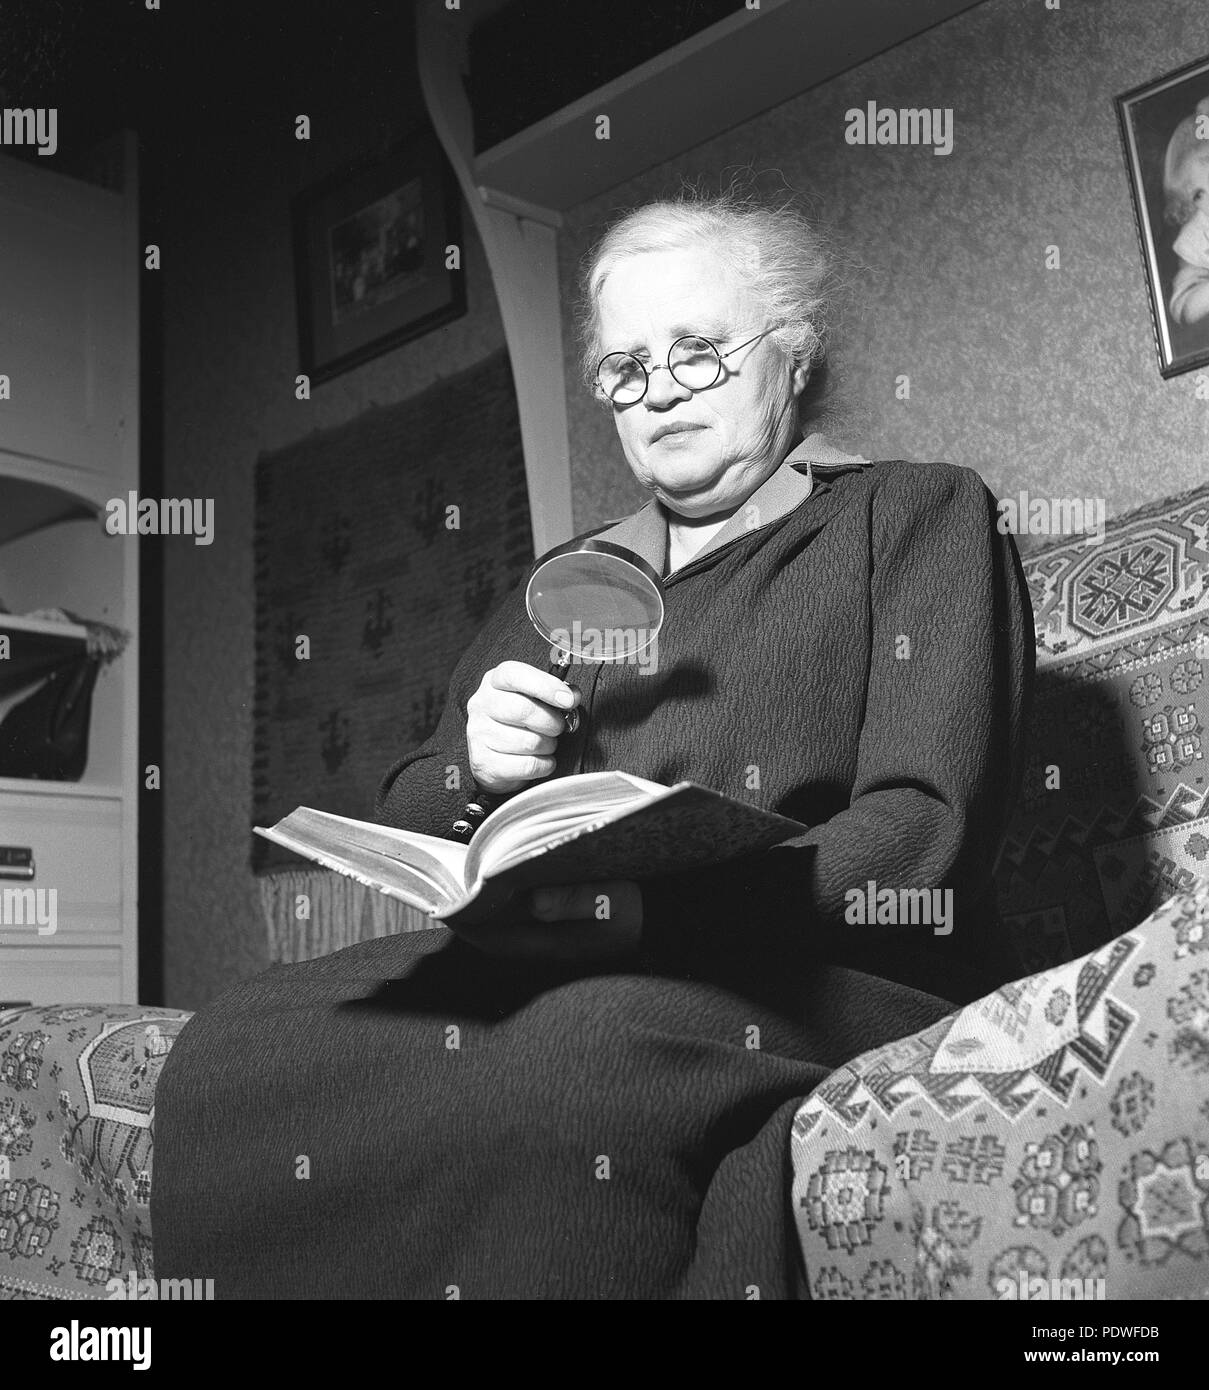 1940s woman with glasses. An older lady is looking in a book using both glasses and a magnifying glass. Most people associate the magnifying glass with the character private detective Sherlock Holmes created by Conan Doyle. It is also a common symbol and icon to clarifying the functions of searching and zooming in computer programs and on internet. 1942. Photo Kristoffersson/A84-6 Stock Photo